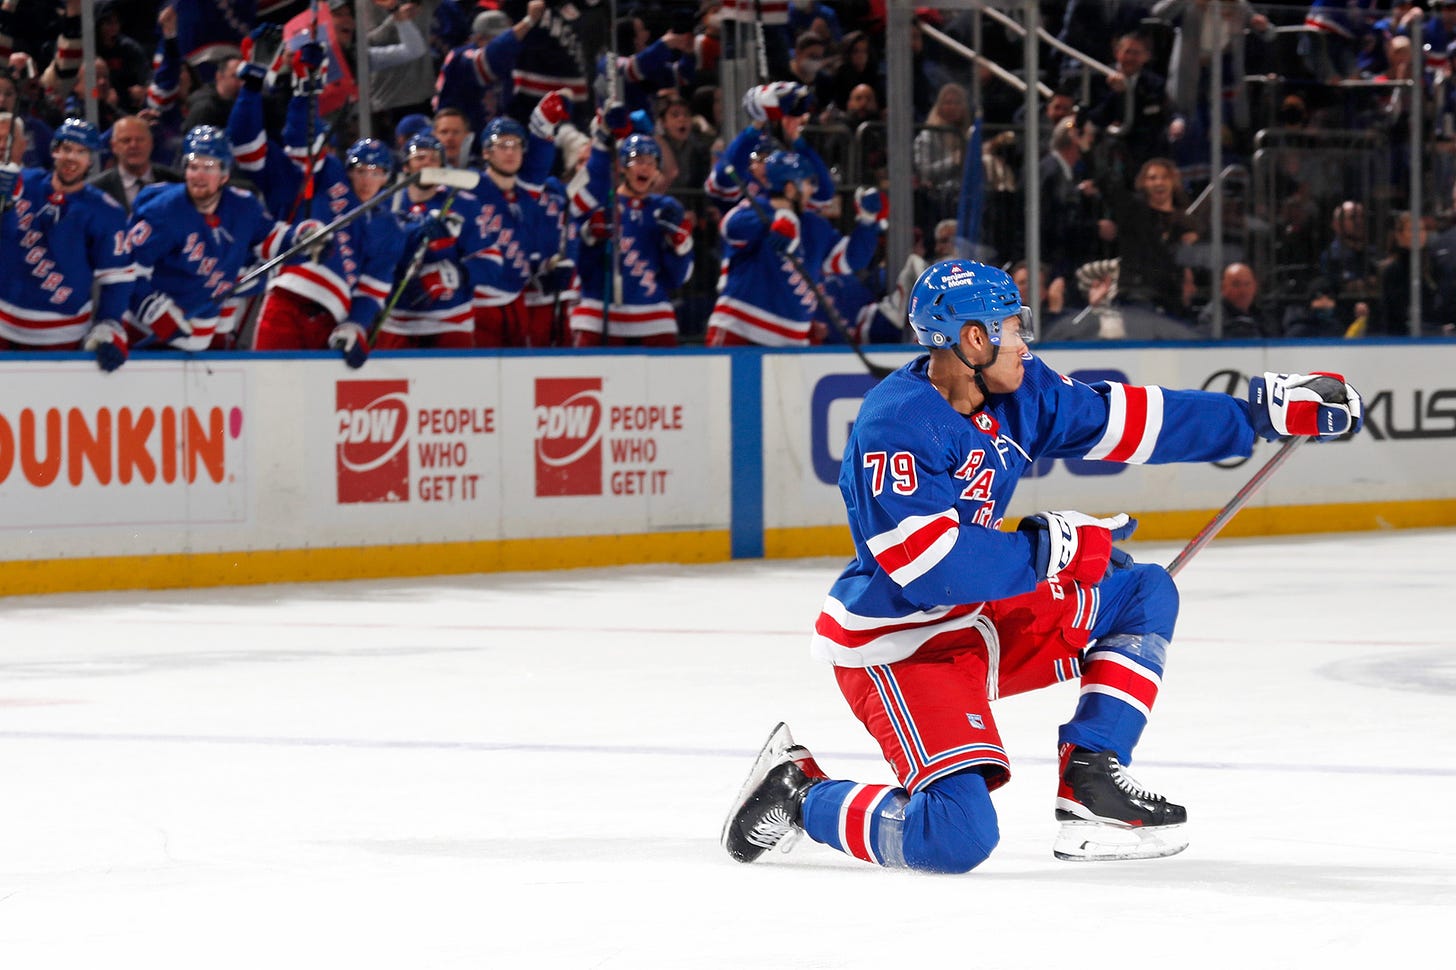 K'Andre Miller goal saves Rangers after 'awful' performance